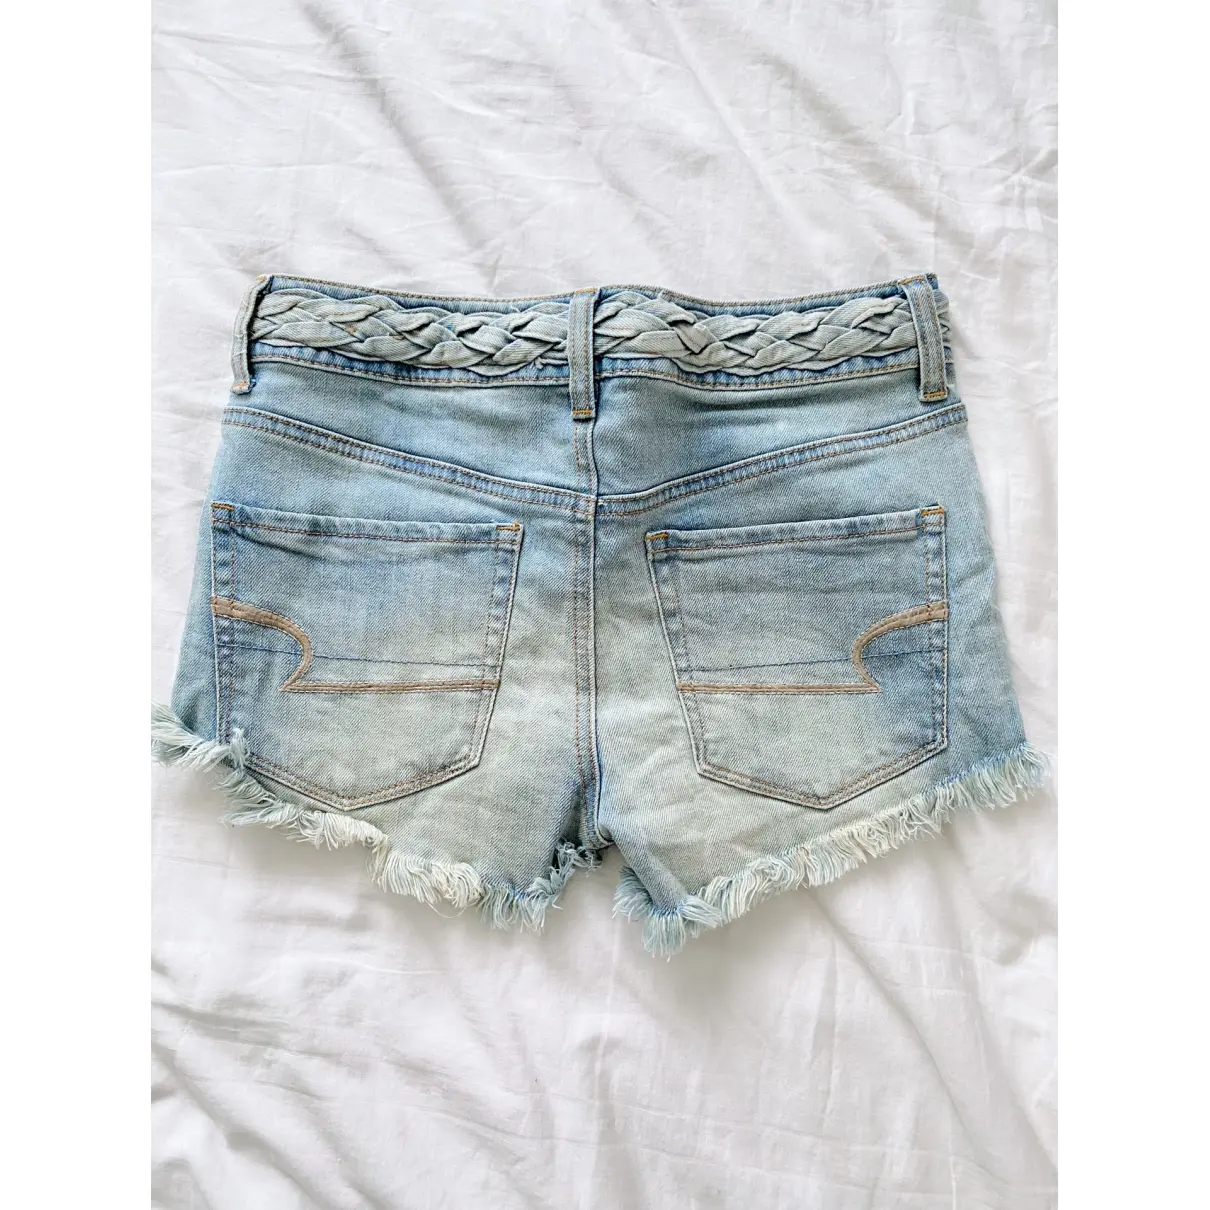 Buy American Outfitters Mini short online